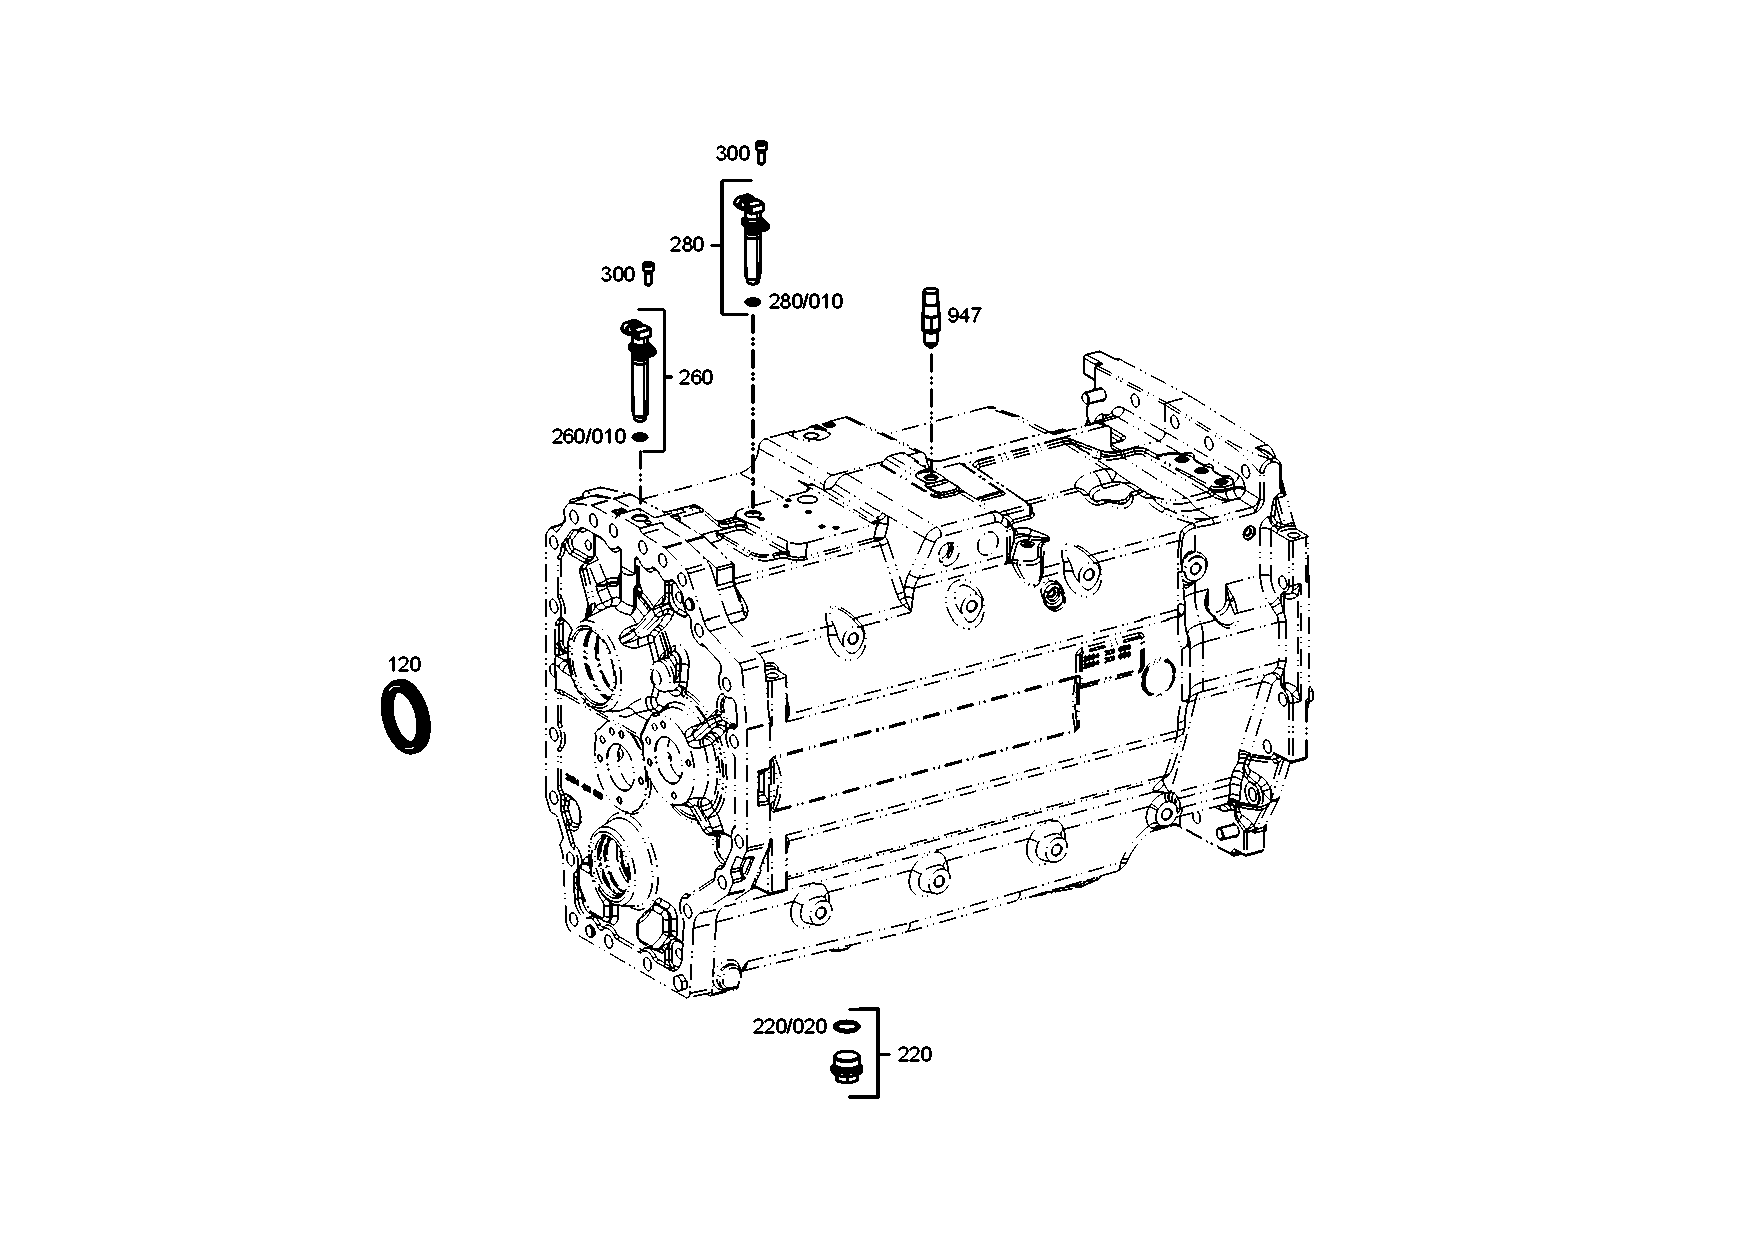 drawing for AGCO X486.545.900.000 - HEXAGON SCREW (figure 4)